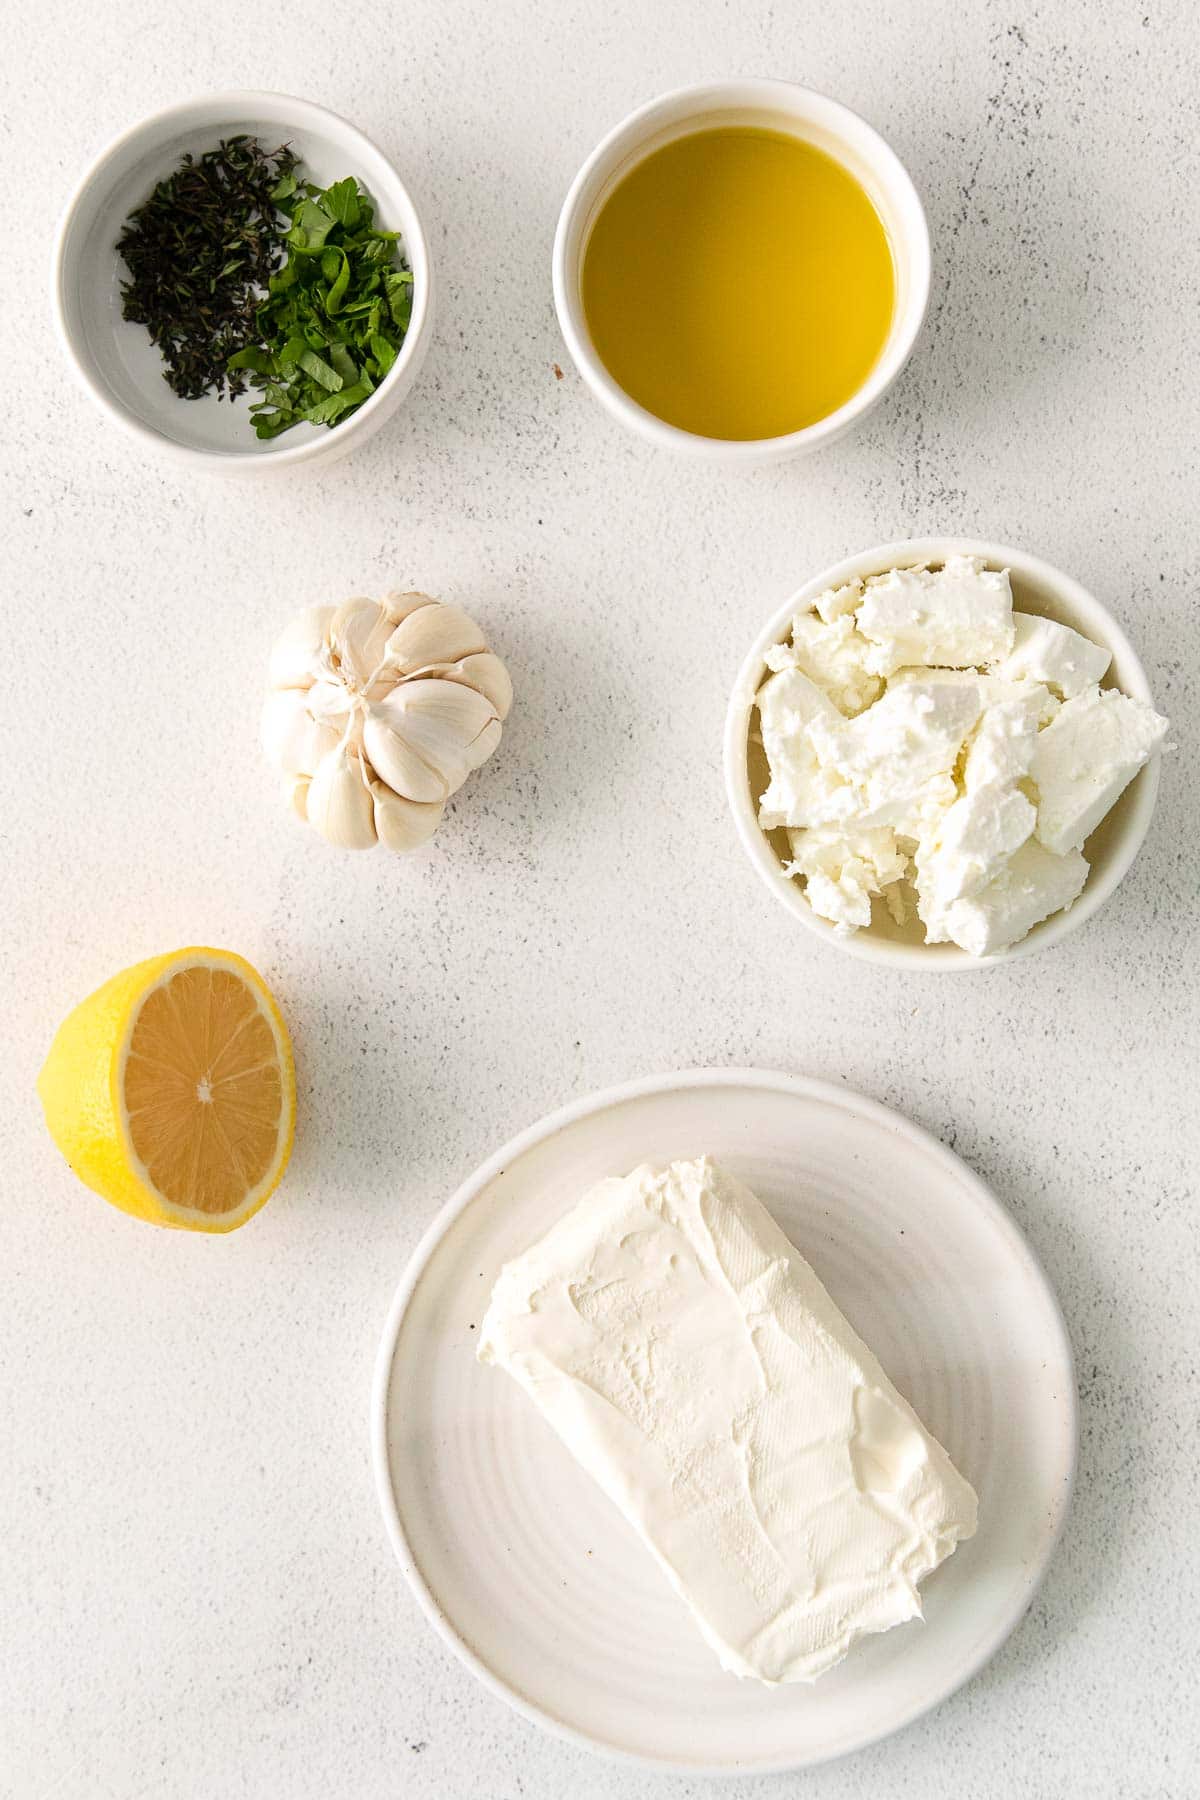 several white bowls with ingredients for feta dip - feta cheese, block of cream cheese, thyme, olive oil and lemon